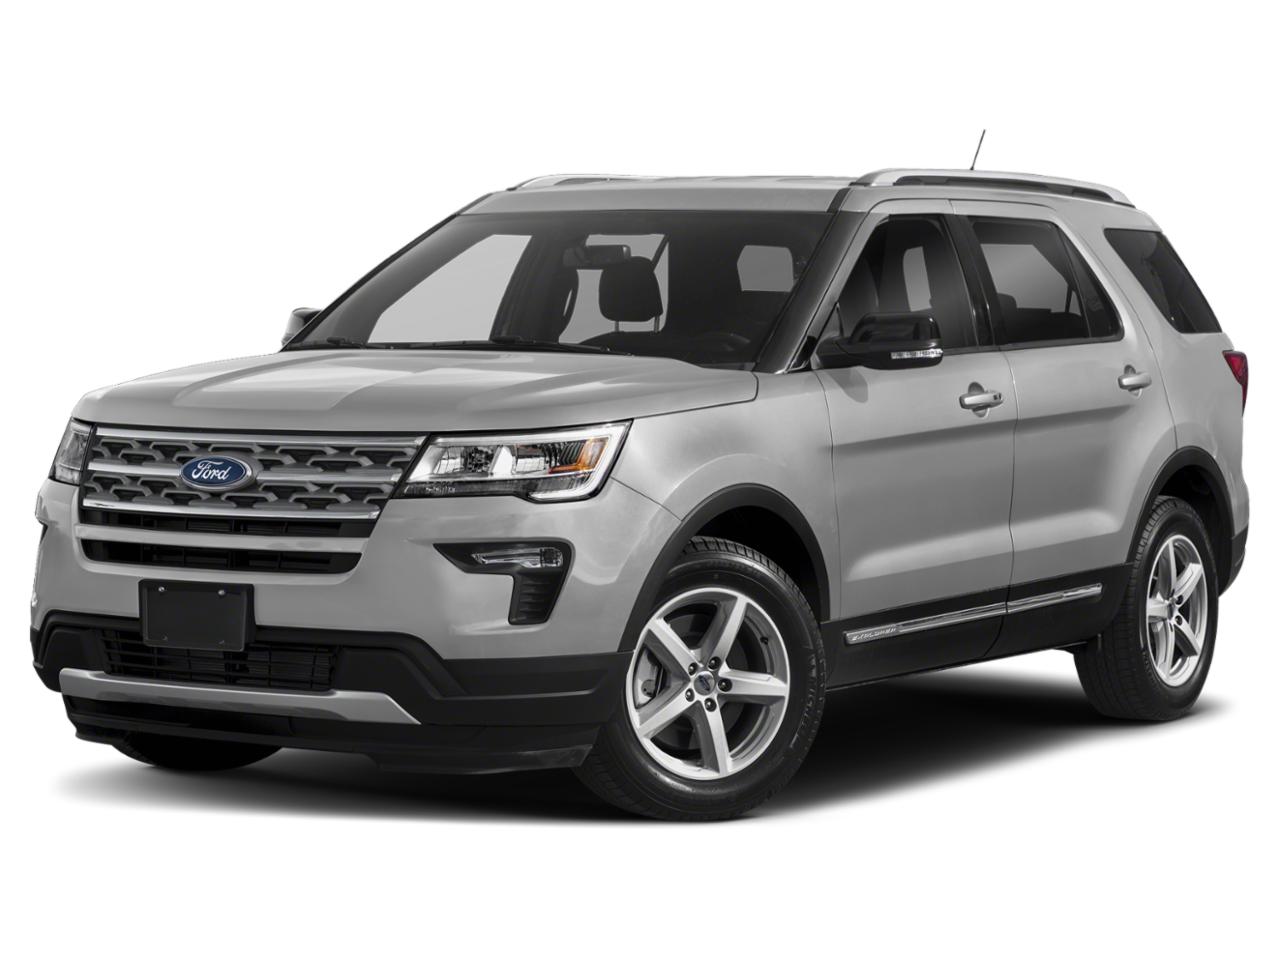 2018 Ford Explorer  Specifications  Car Specs  Auto123